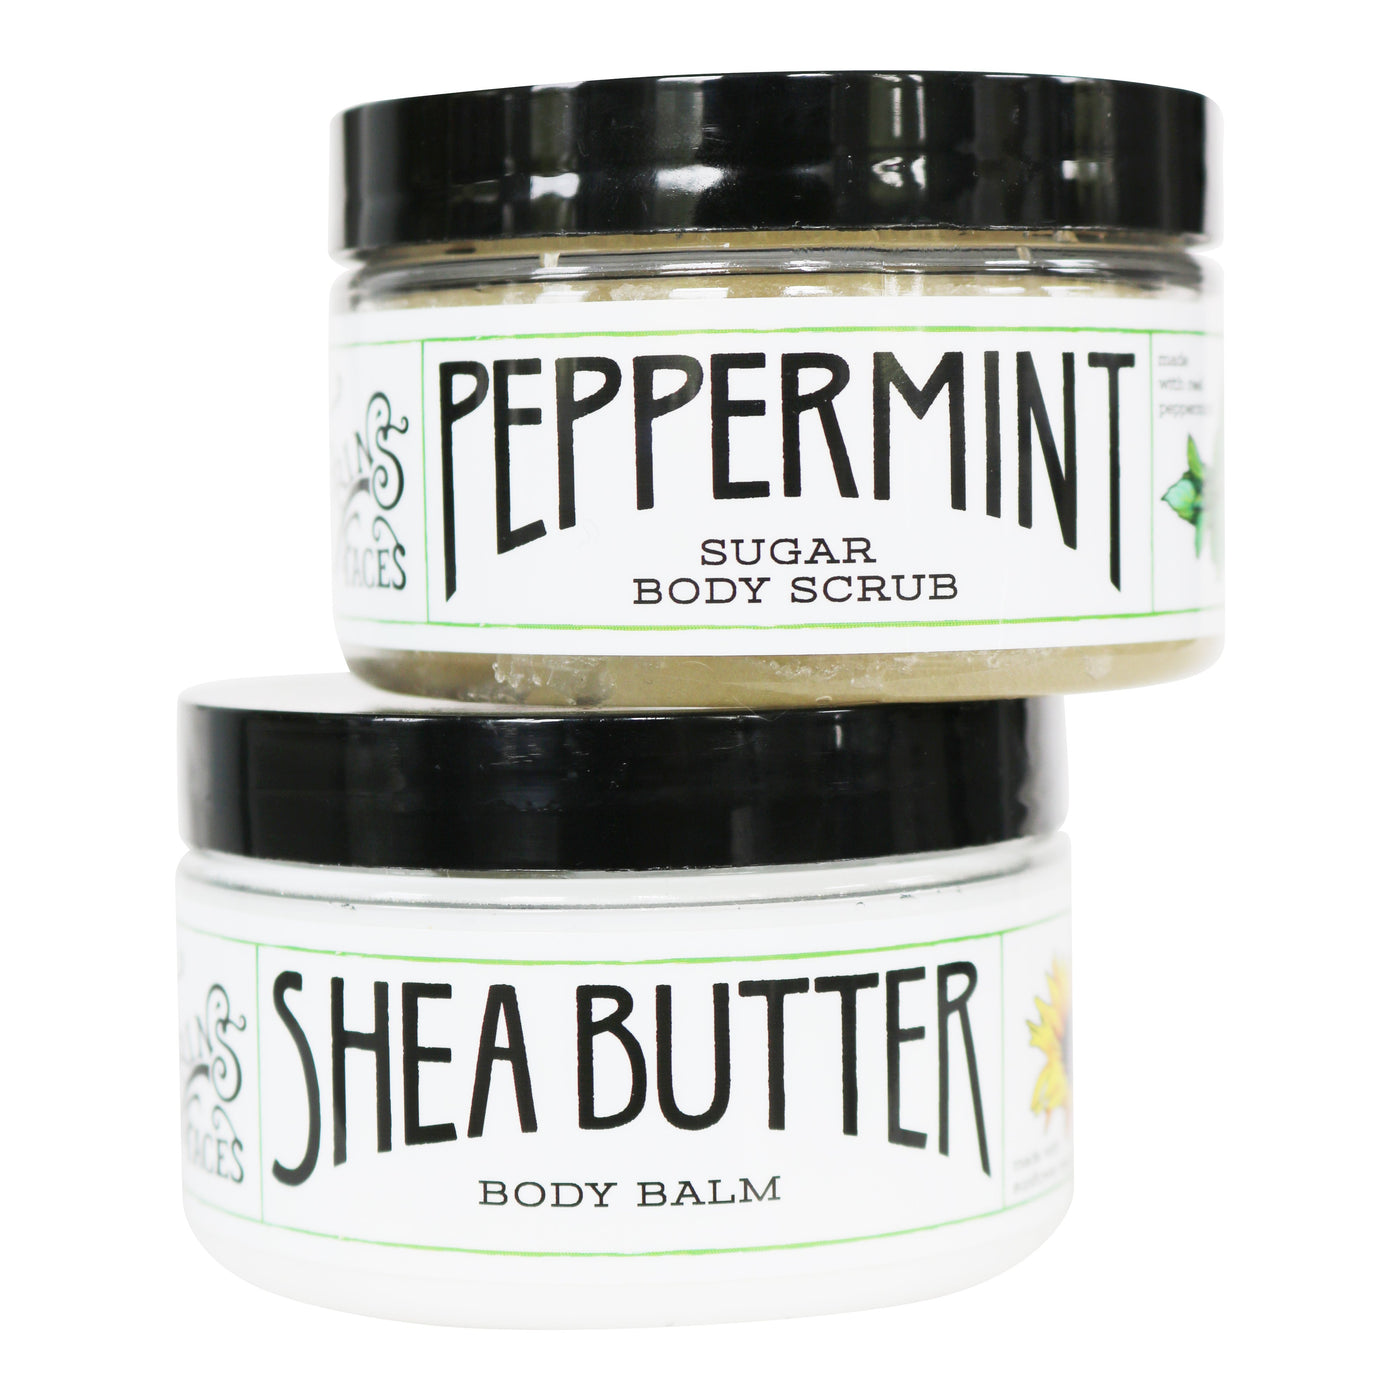 4oz peppermint sugar body scrub on top of the 4oz shea butter body balm in closed containers